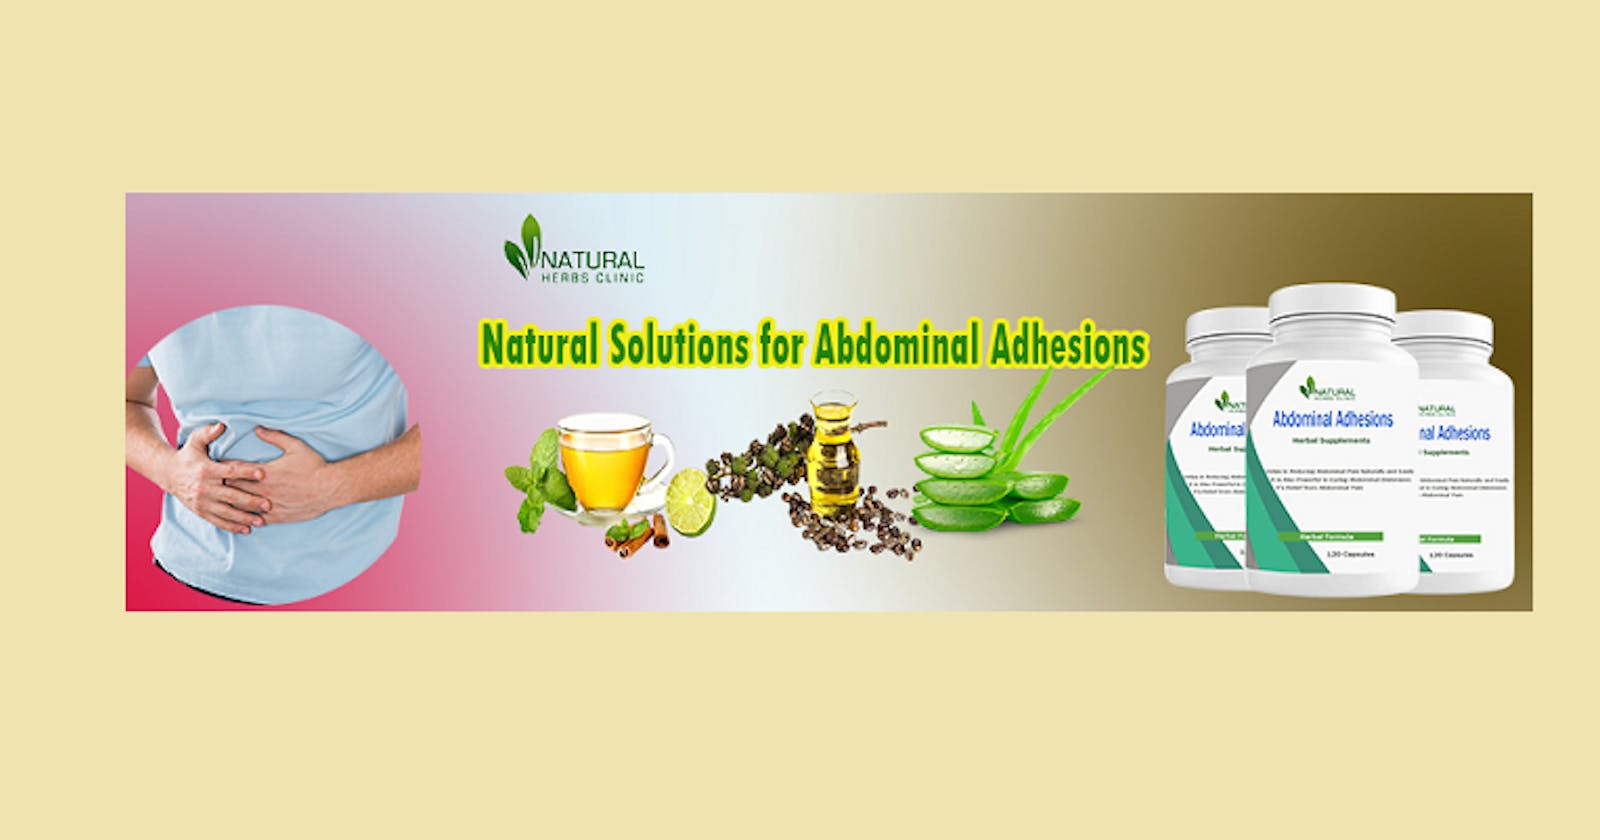 Say Goodbye to Abdominal Adhesions with Herbal Remedies